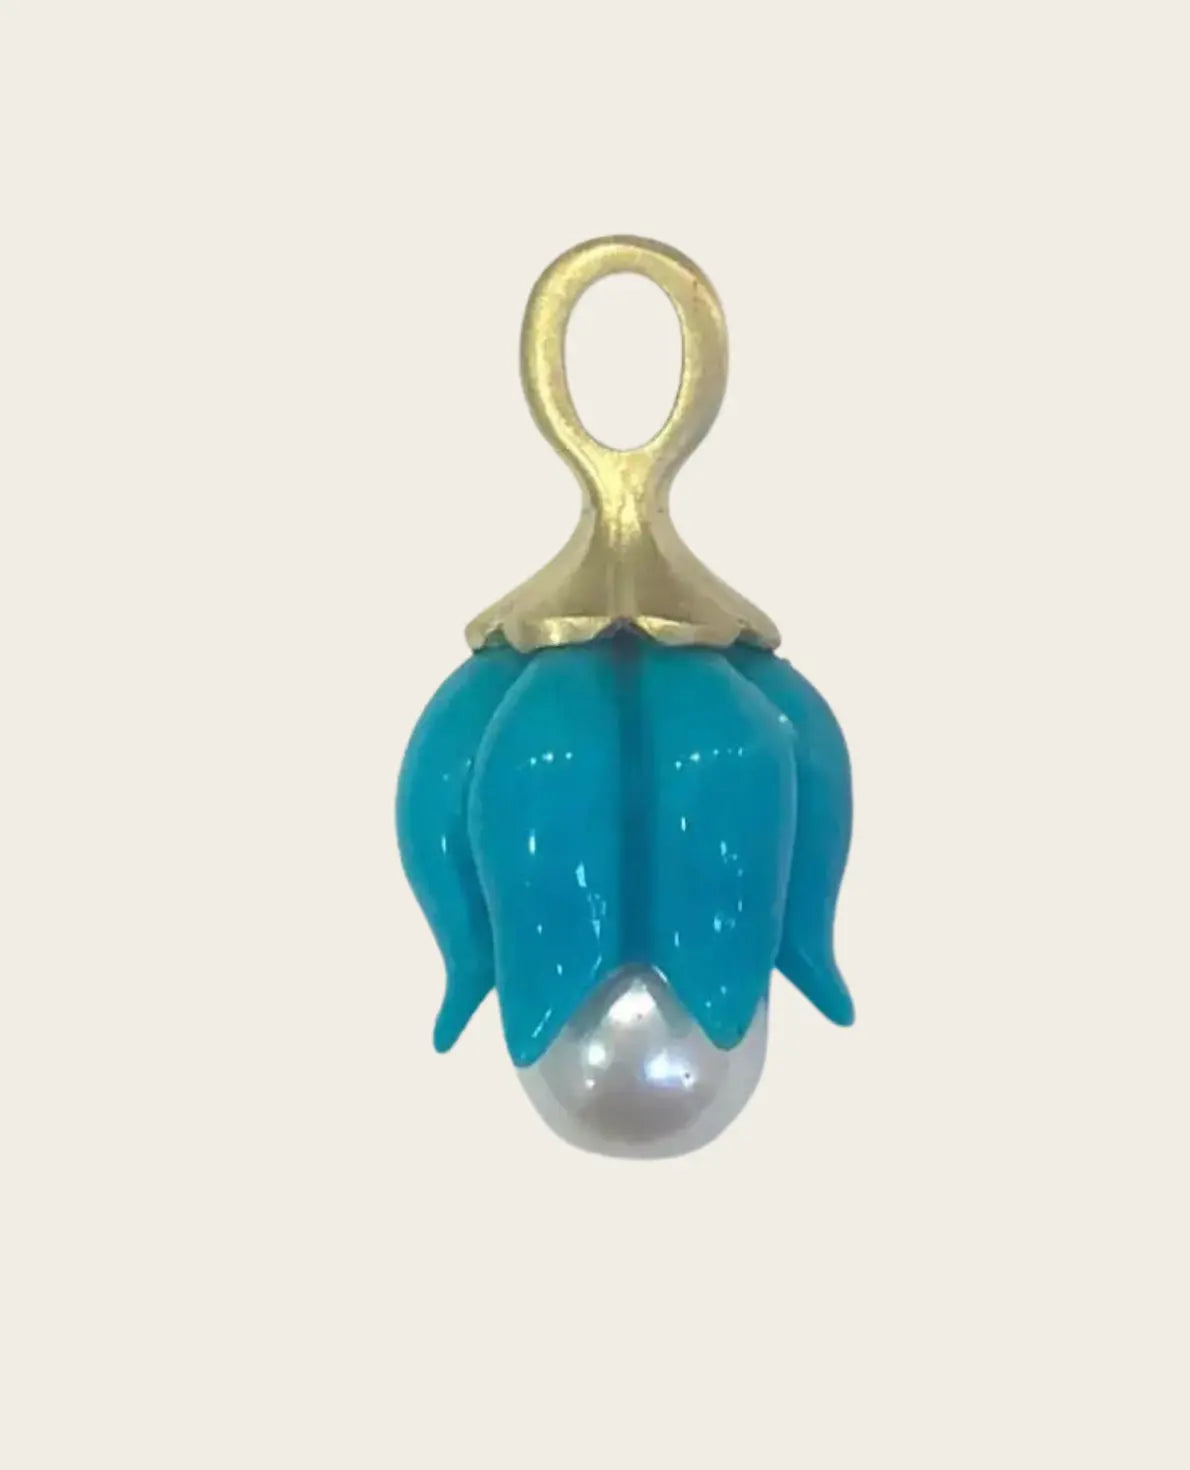 Carved Turquoise Lily of the Valley with Akoya Pearl Pendant Carved Turquoise Lily of the Valley with Akoya Pearl Pendant Irene Neuwirth Irene Neuwirth  Squash Blossom Vail